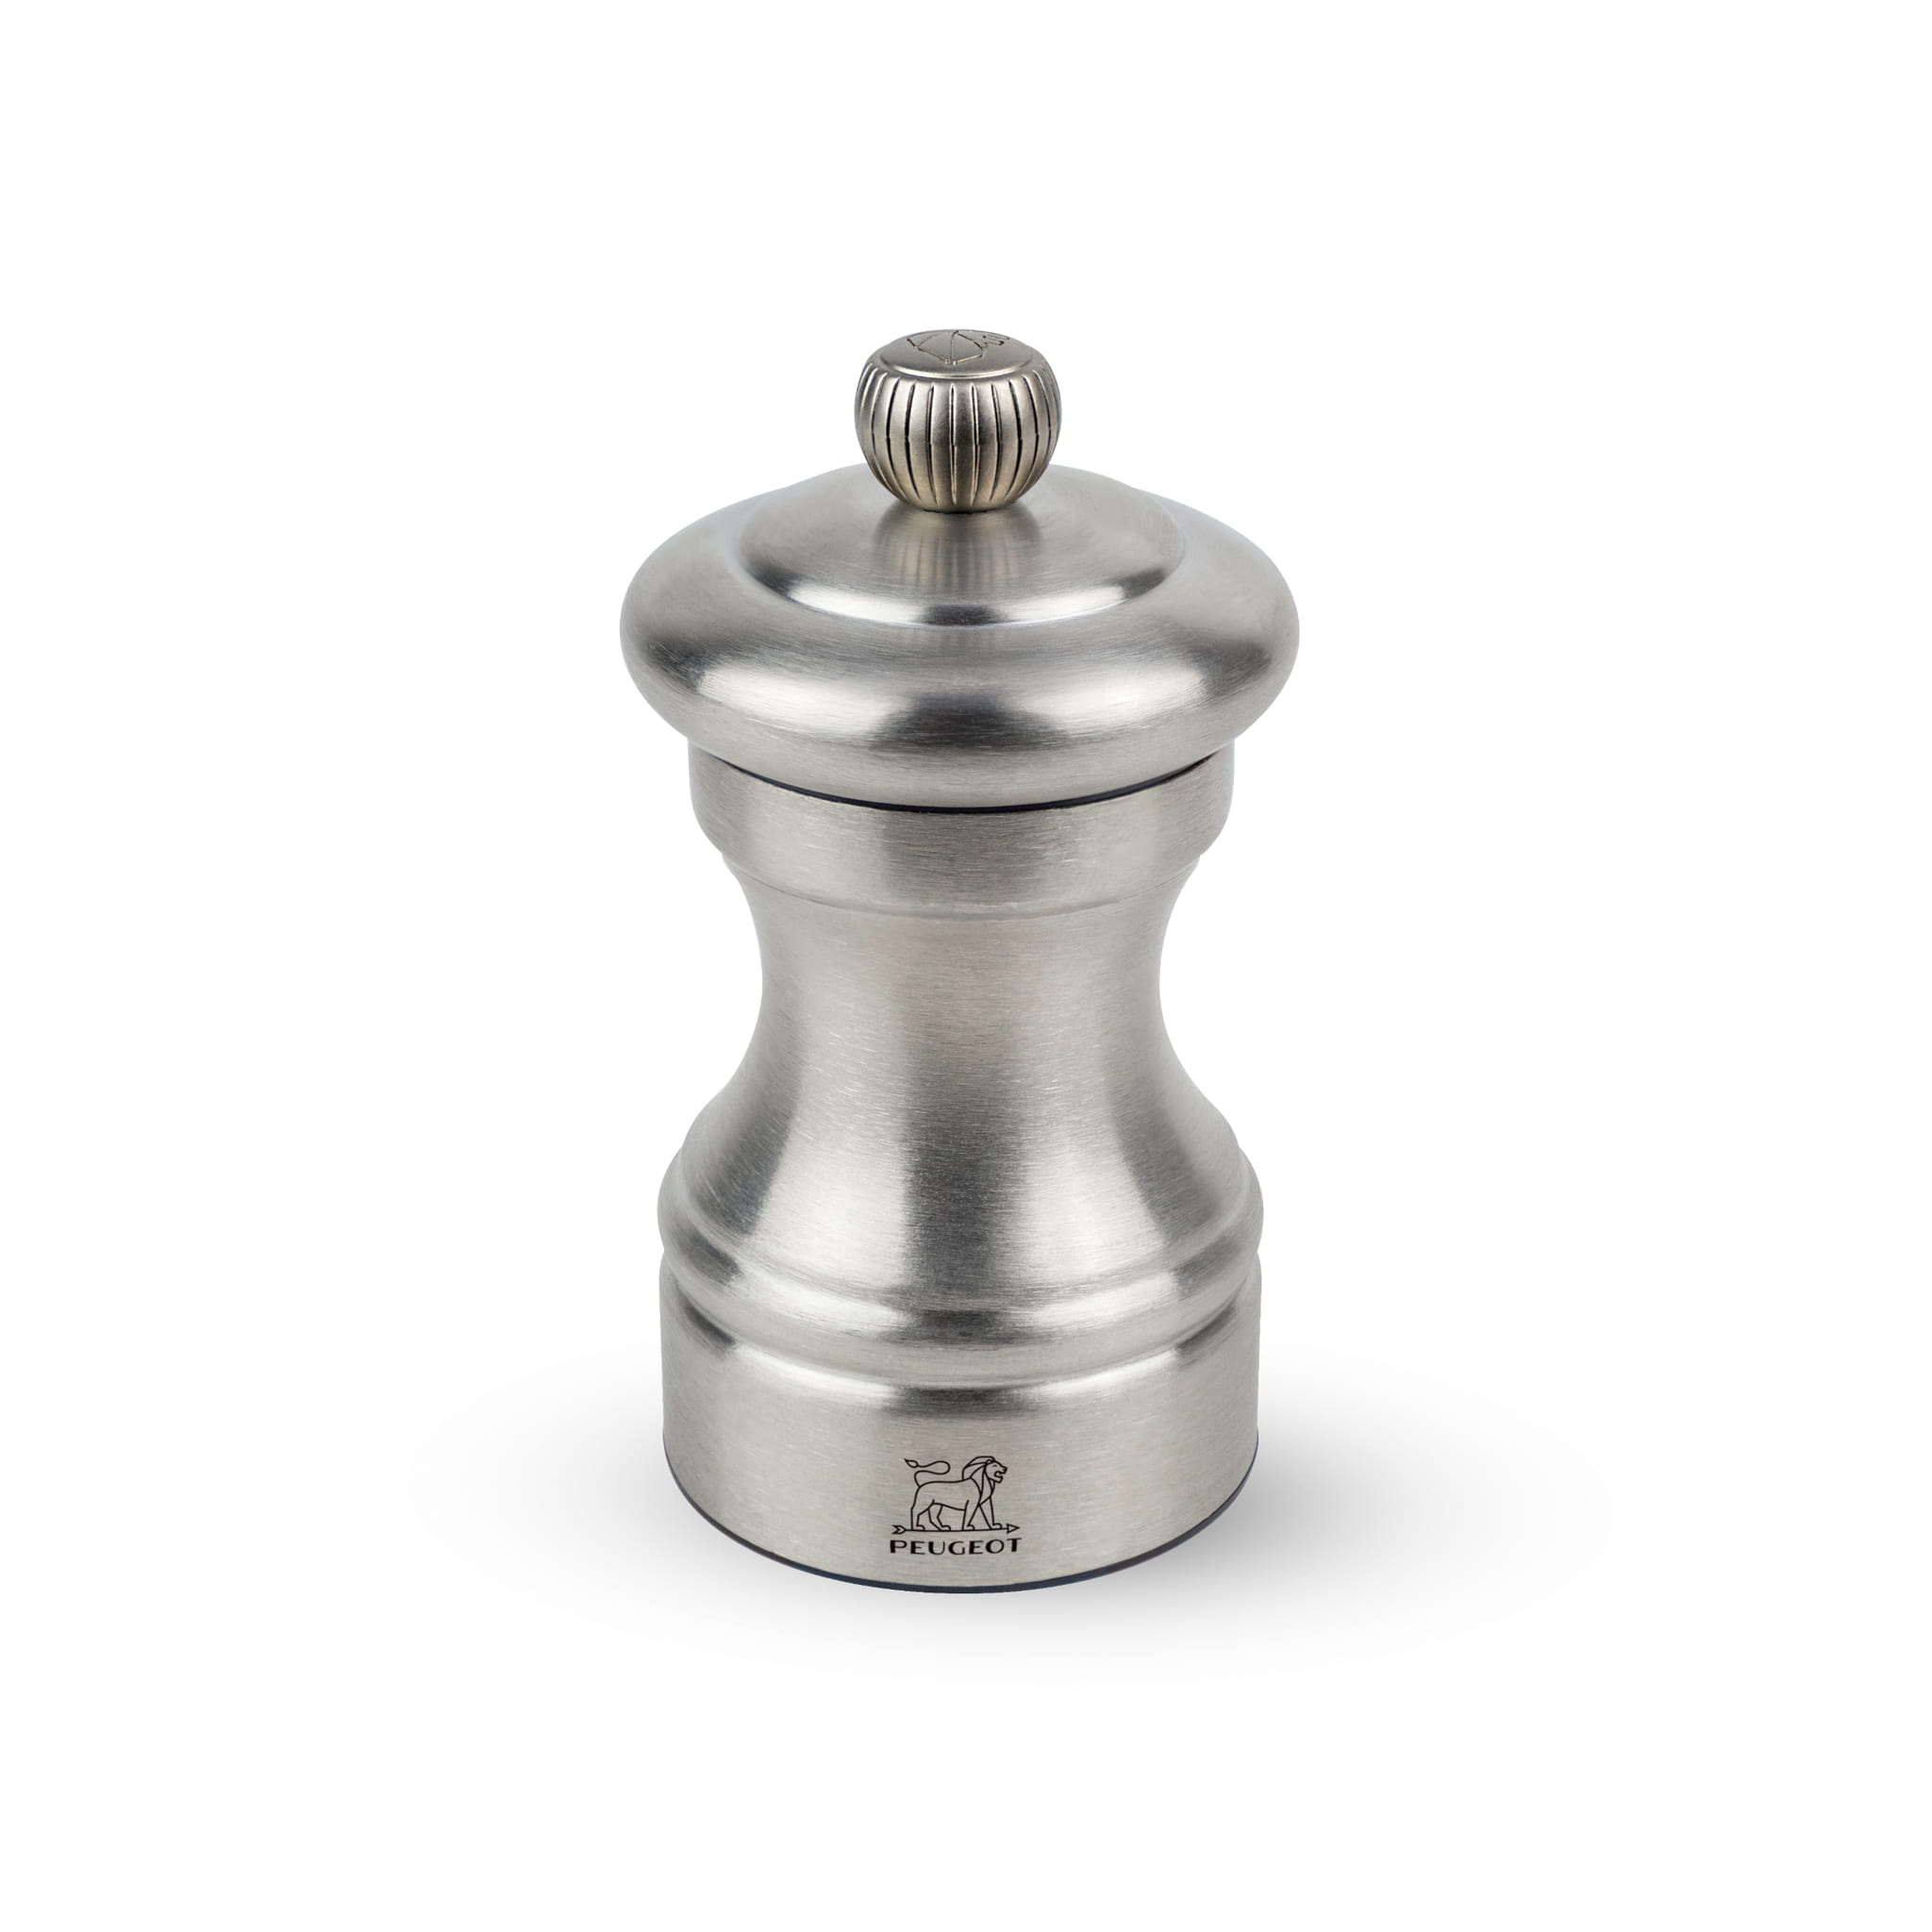 Peugeot Bistro Chef Stainless Steel Pepper Mill 10cm